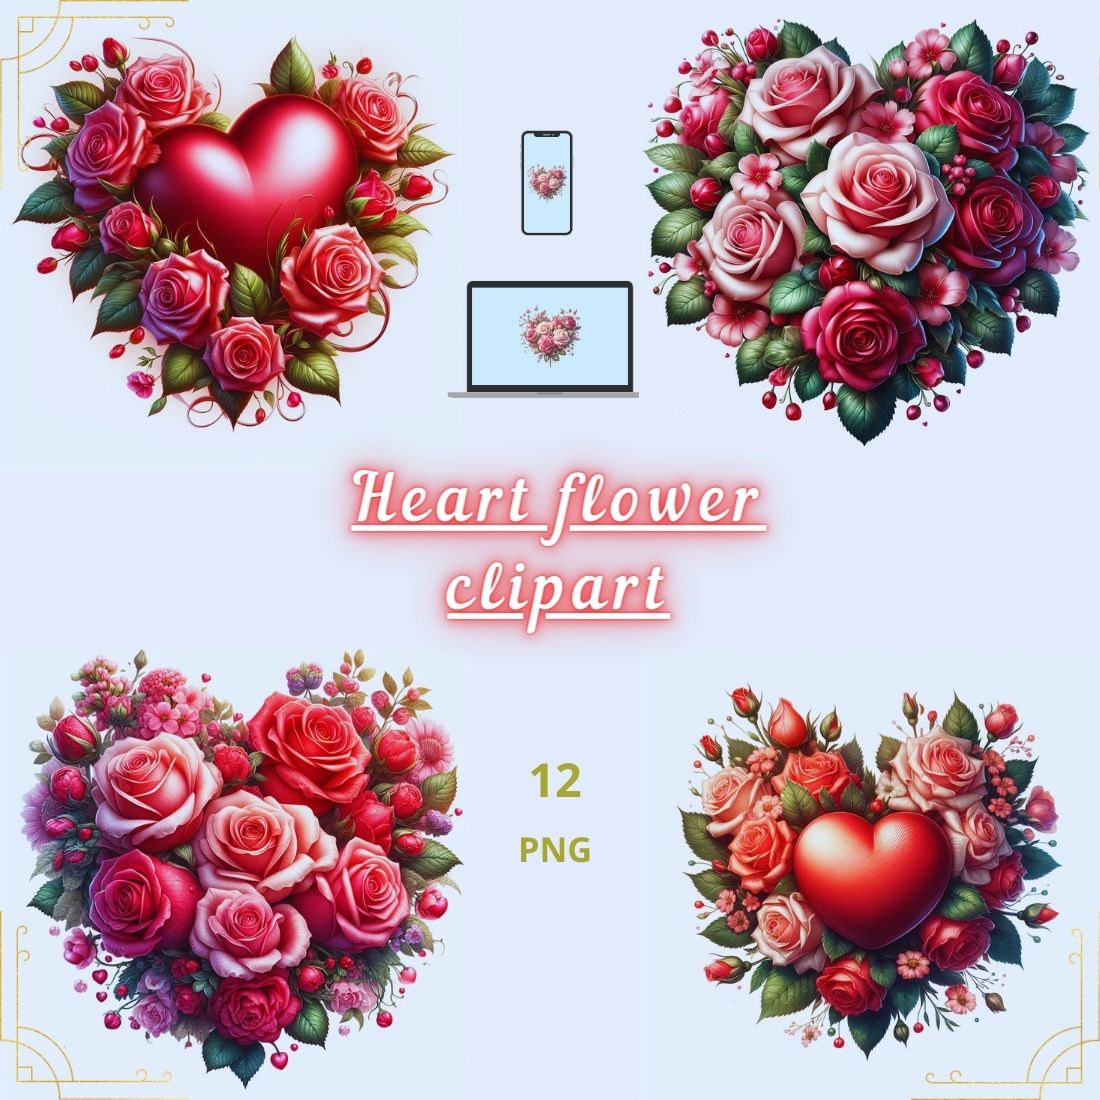 Heart flower clipart preview image.